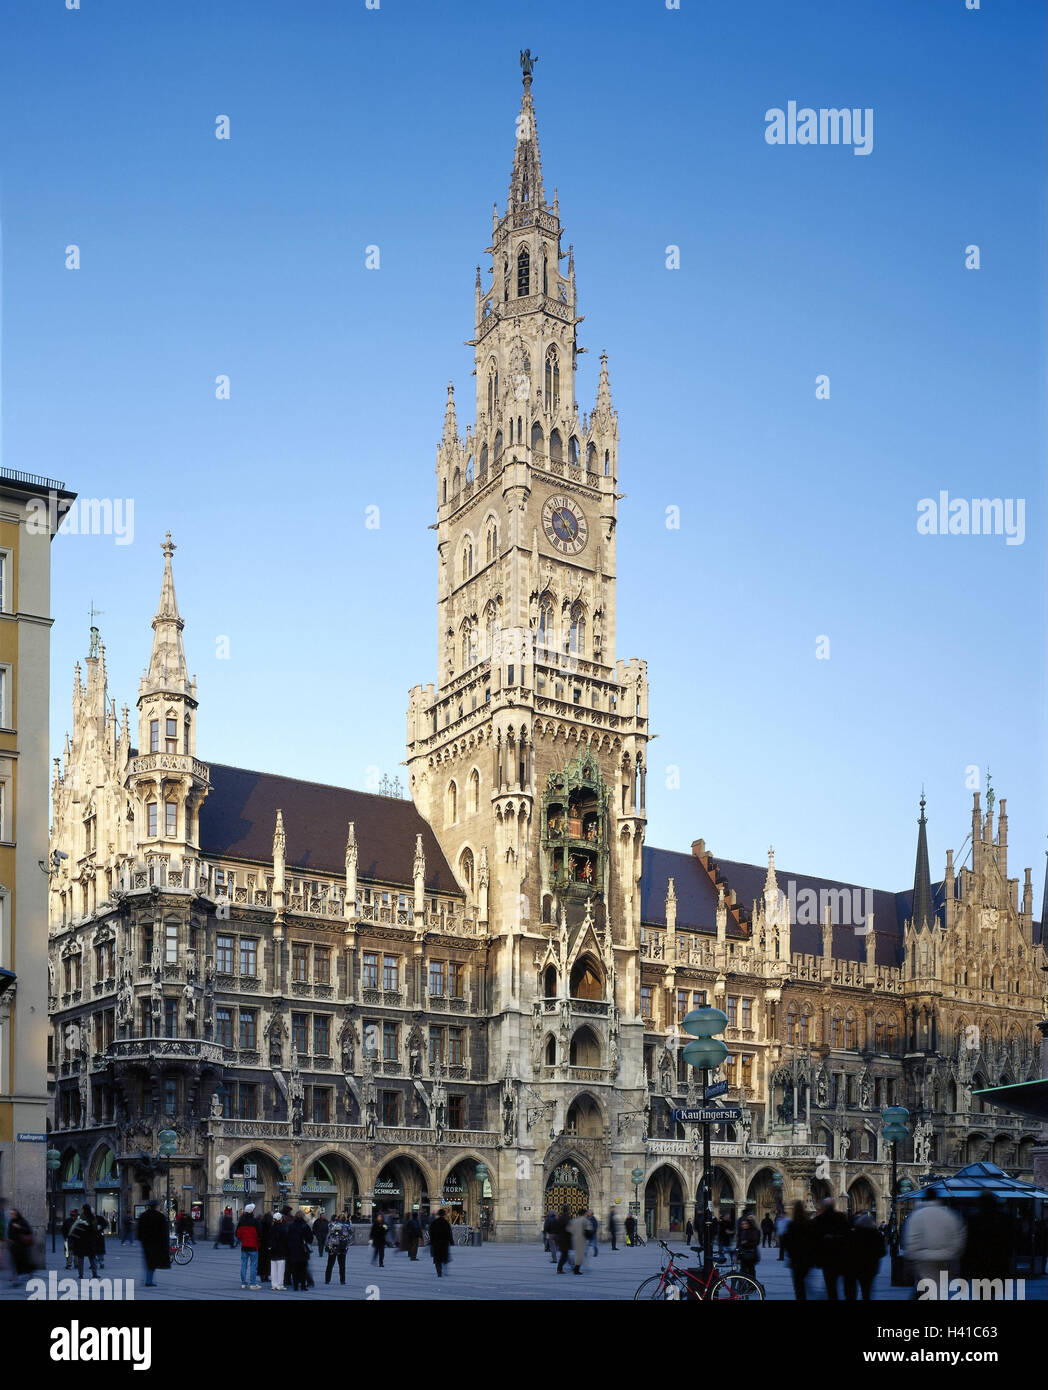 Germany, Bavaria, Munich, Marienplatz, new city hall, passer-by, Upper Bavaria, pedestrian area, structure, building, architecture, architectural style, neo-Gothic, in 1867-1908, carillon, place of interest, culture Stock Photo